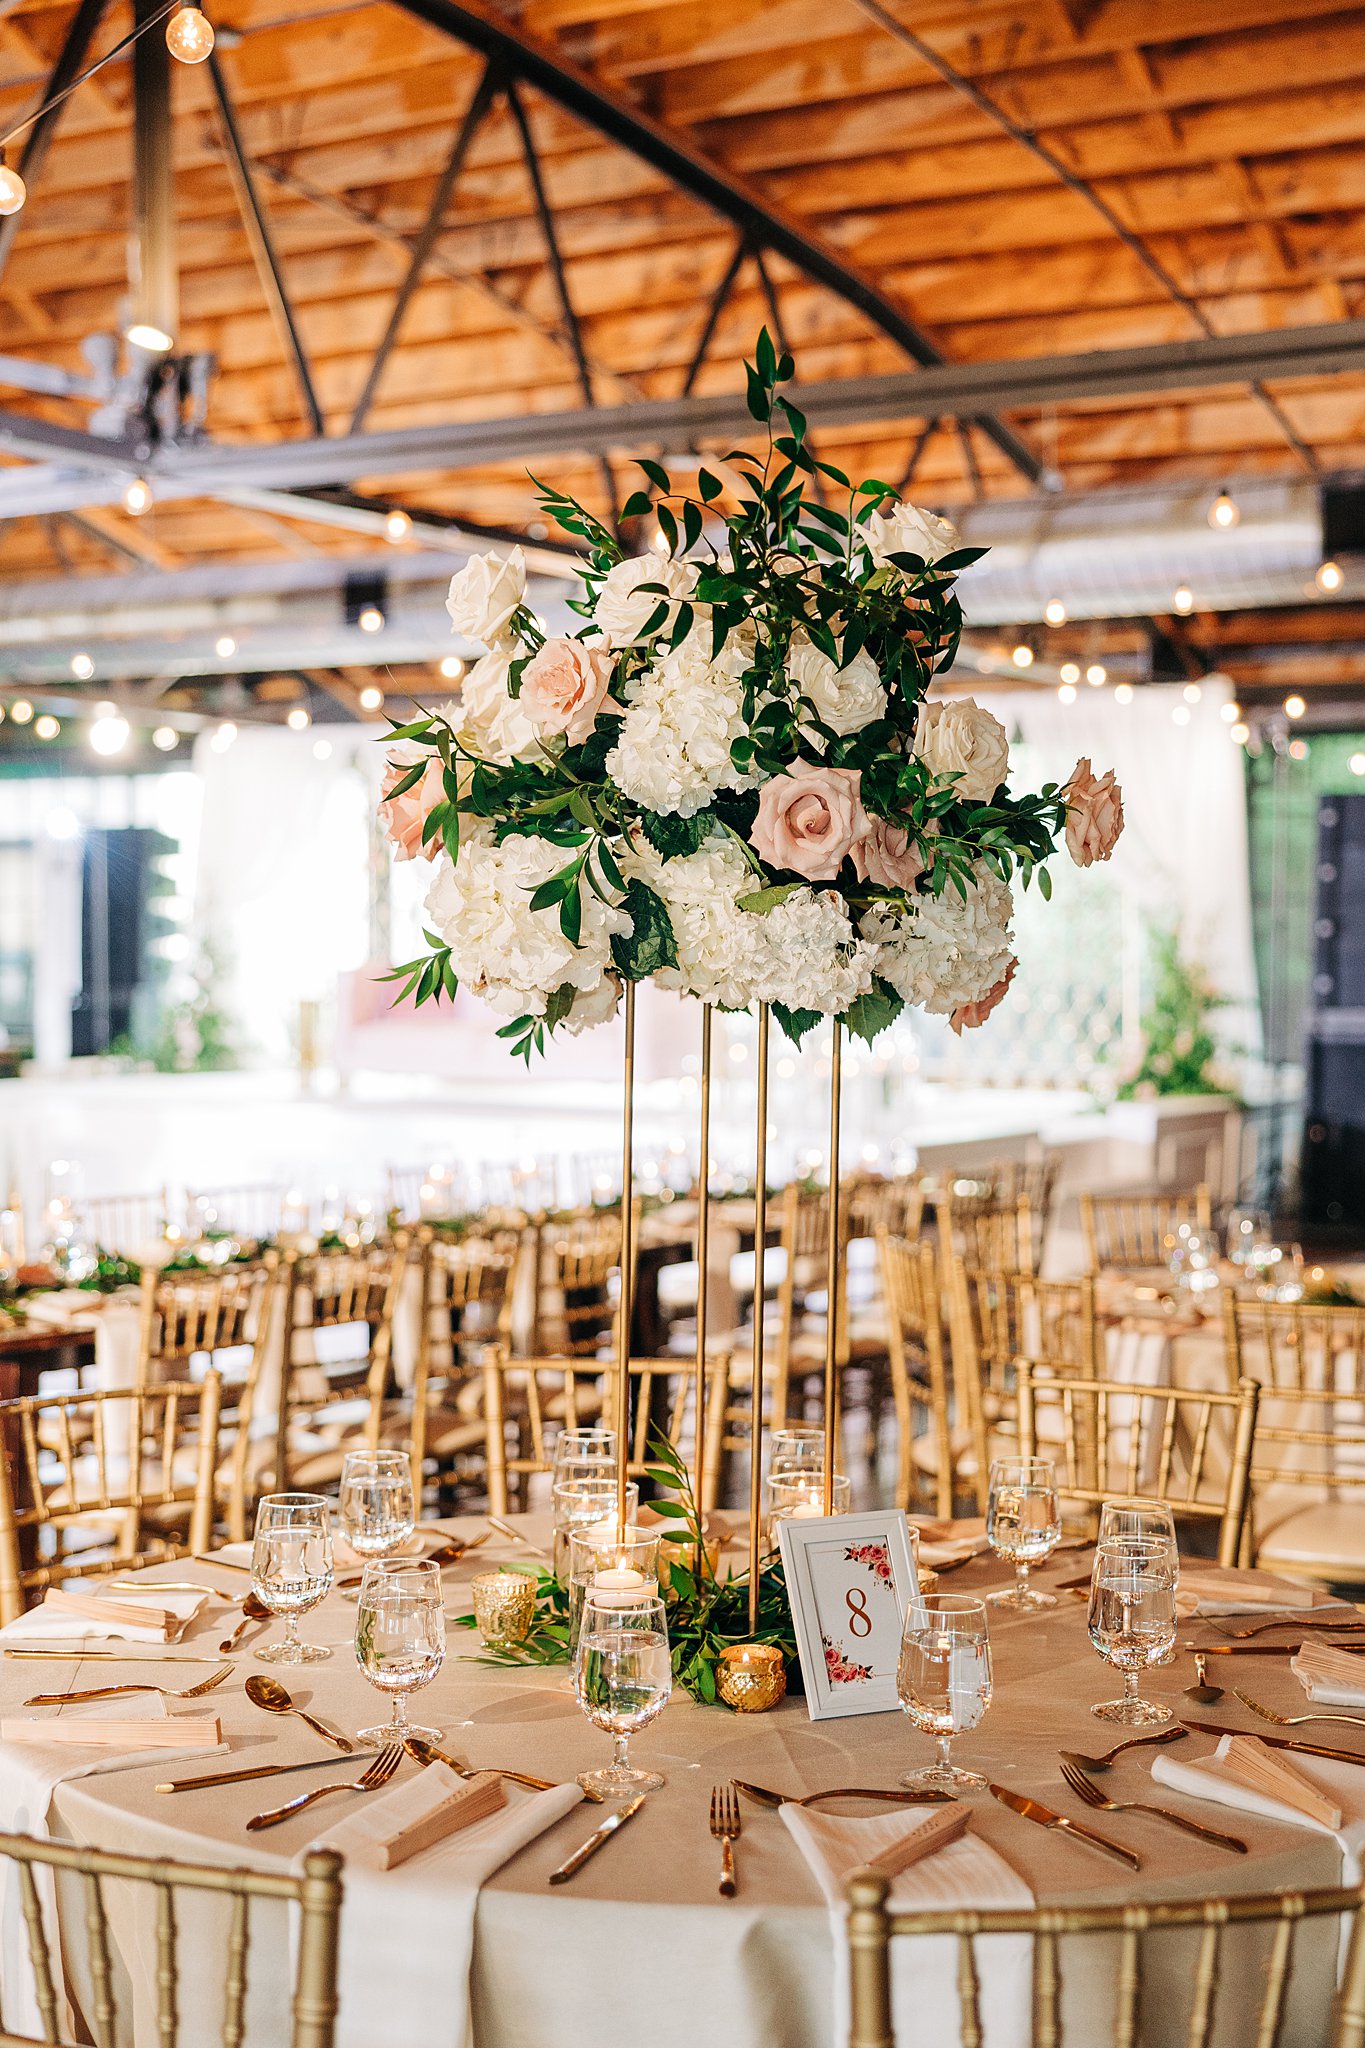 A view of a tall floral centerpiece at a wedding reception table